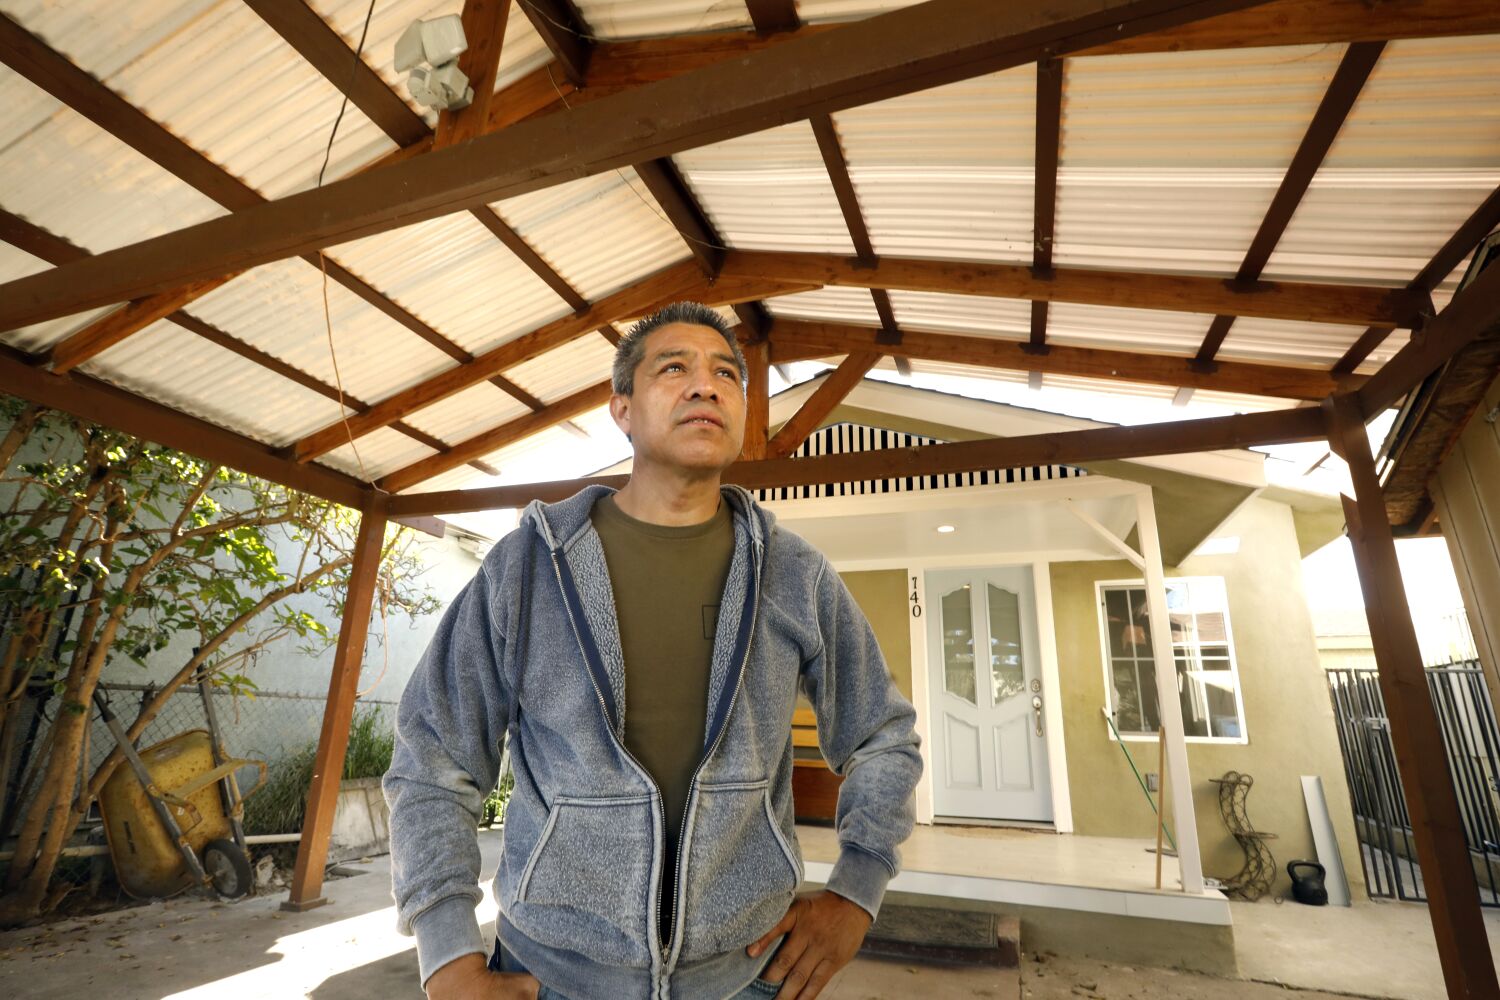 A Watts family gets a helping hand after a house fire pushed them toward homelessness